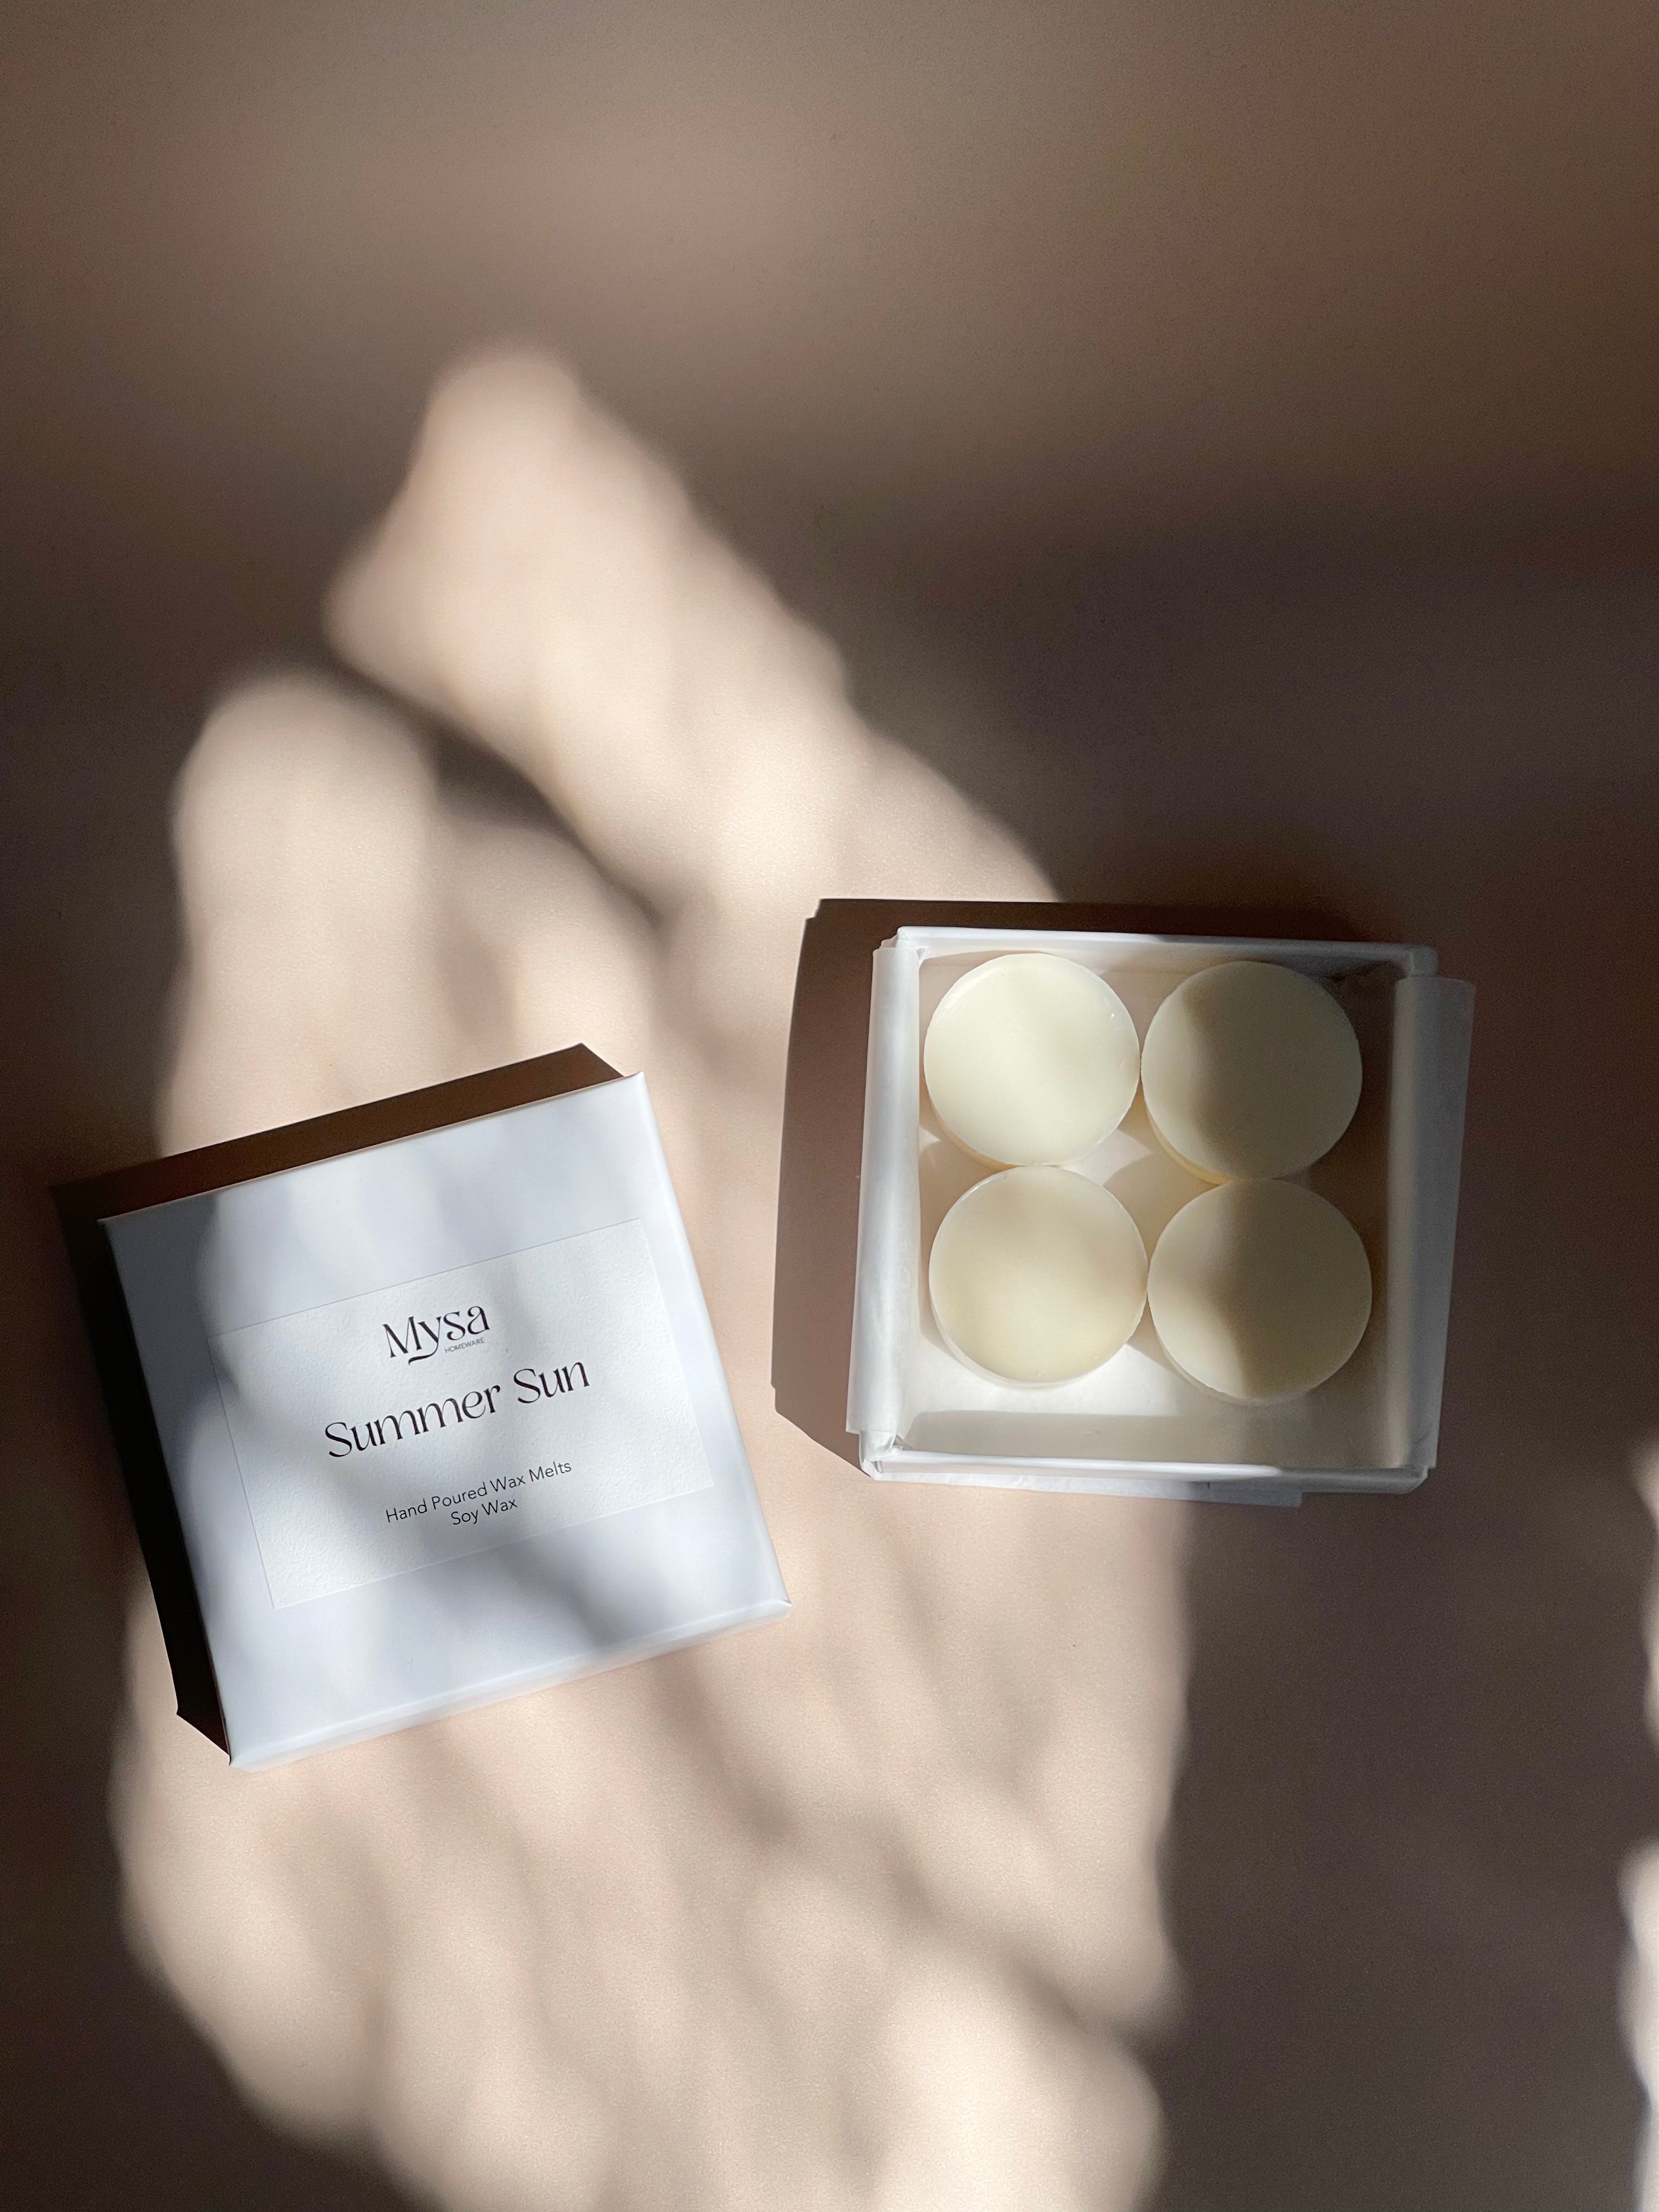 Summer Sun luxury scented wax melts in gift box, with soy wax and Coconut, Nutty, Vanilla, Sandalwood fragrance.